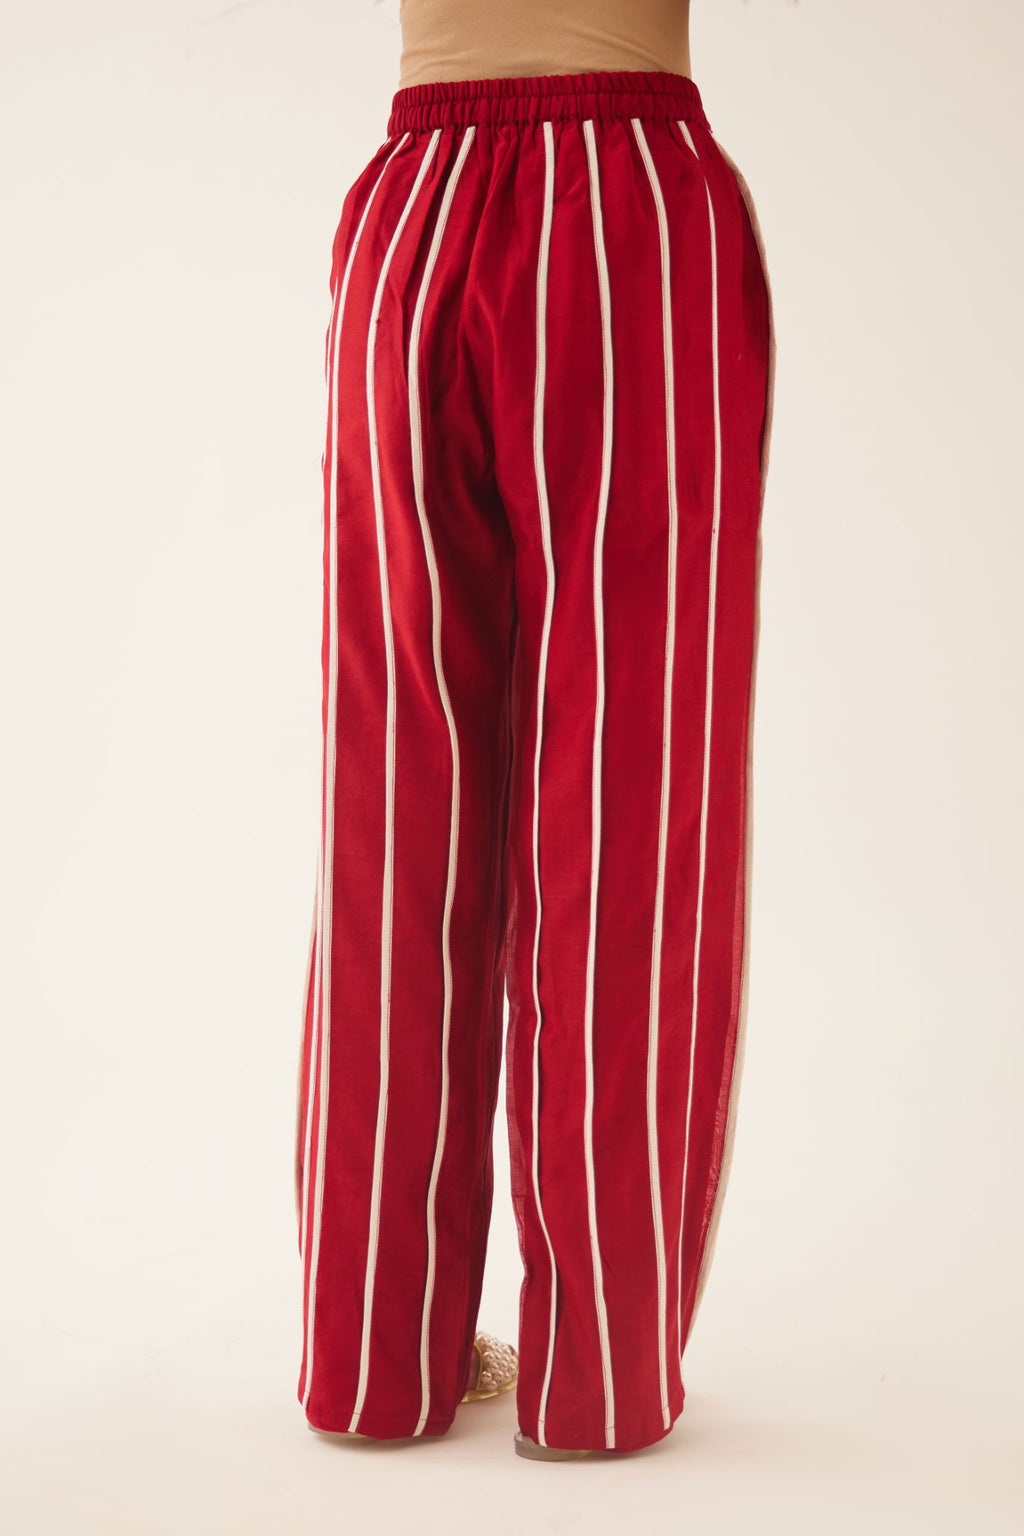 Red silk chanderi straight pants with vertical off white piping detail.